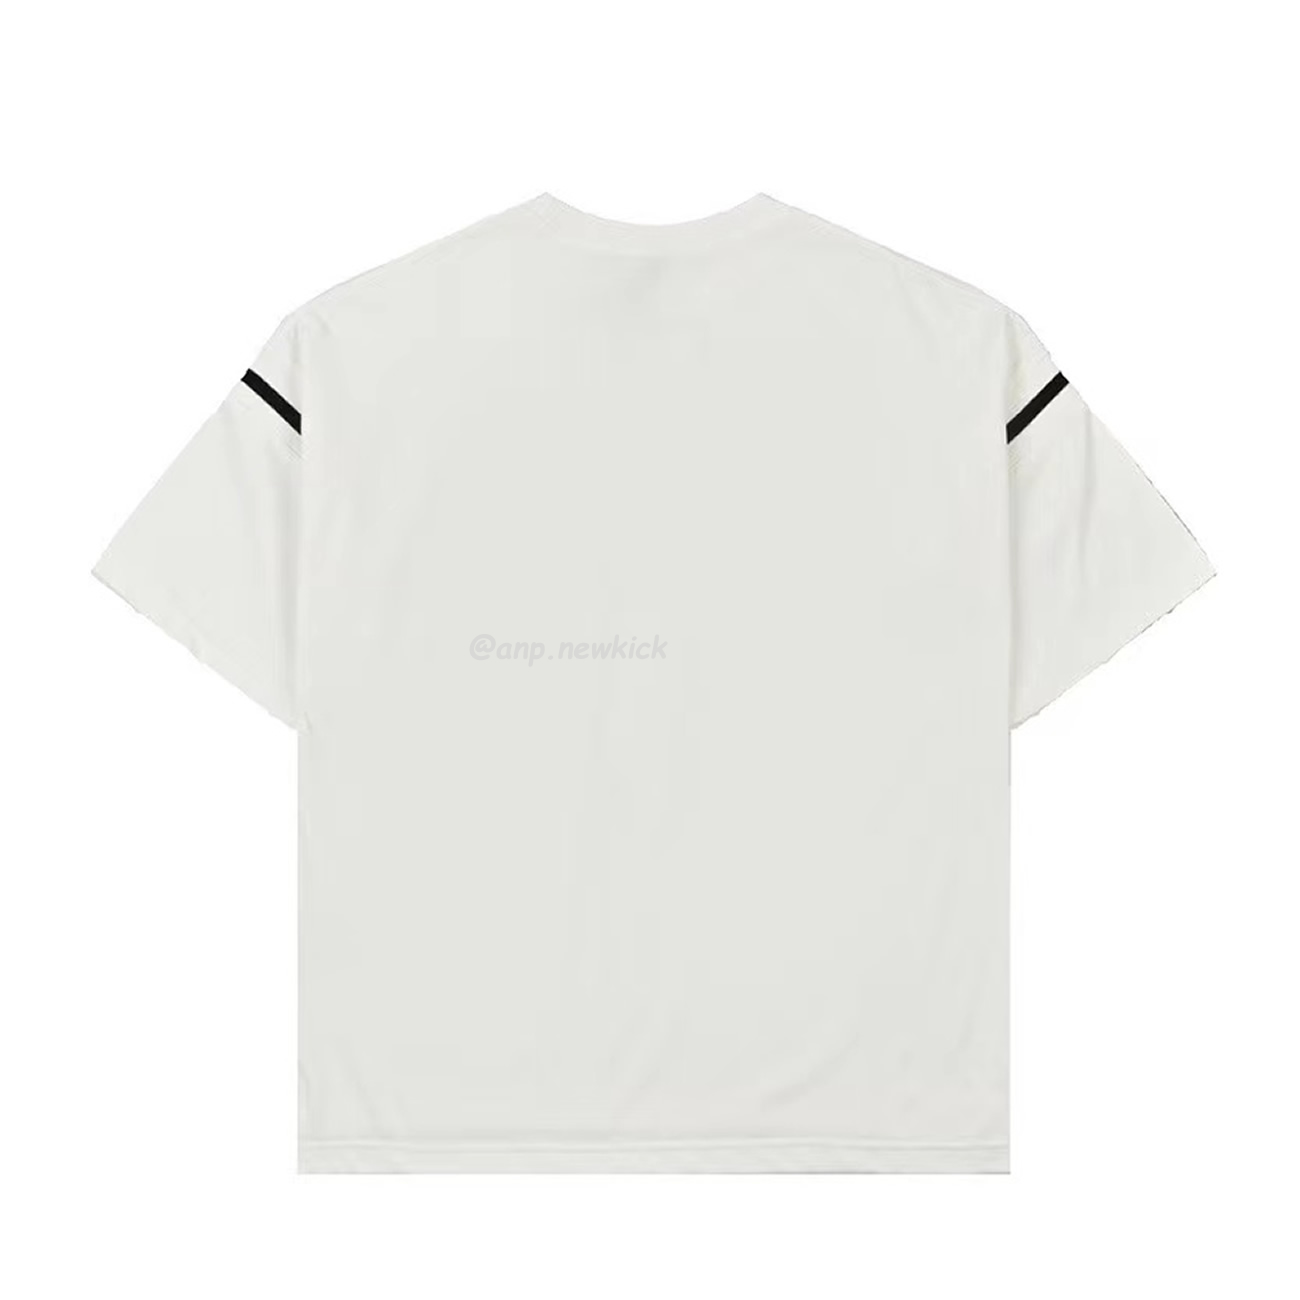 Dior Wide Body Bamboo Pure Cotton Plain Weave Fabric T Shirt White Navy (11) - newkick.org